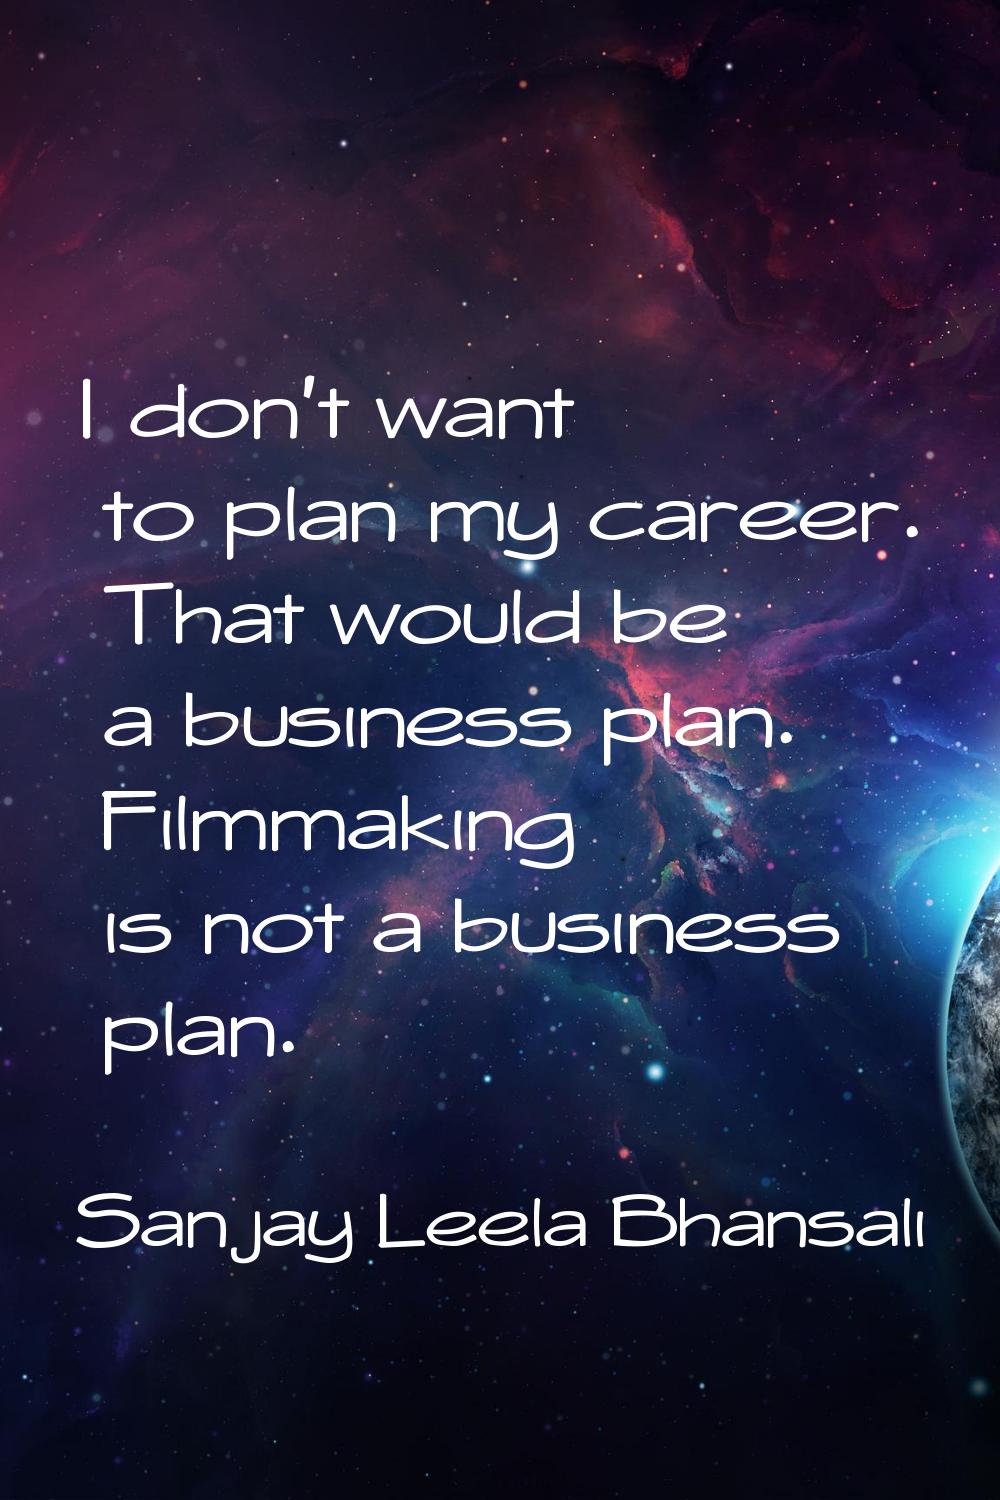 I don't want to plan my career. That would be a business plan. Filmmaking is not a business plan.